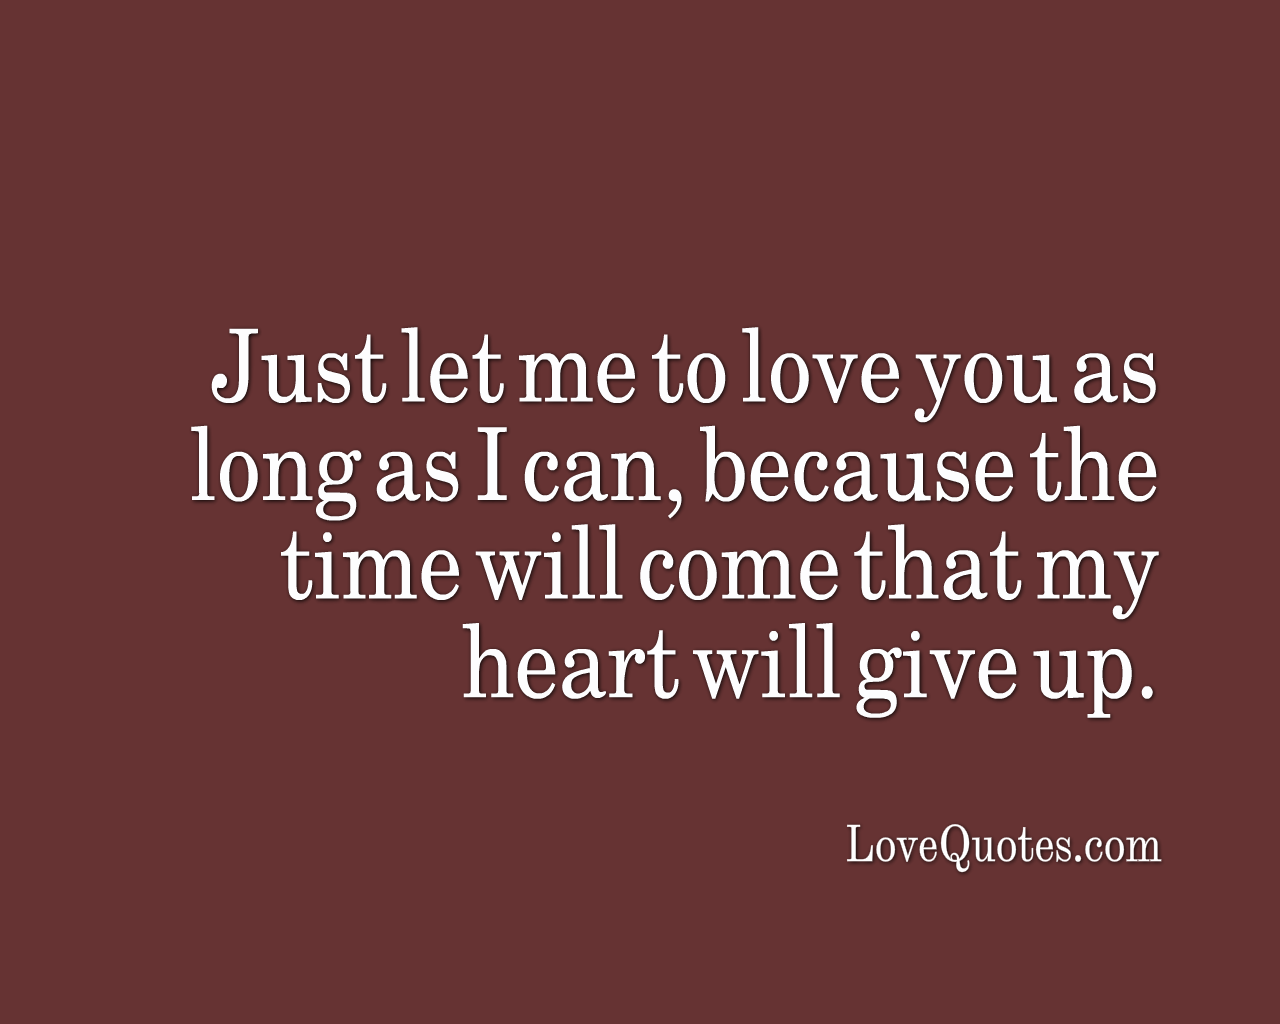 Just Let Me Love You - Love Quotes